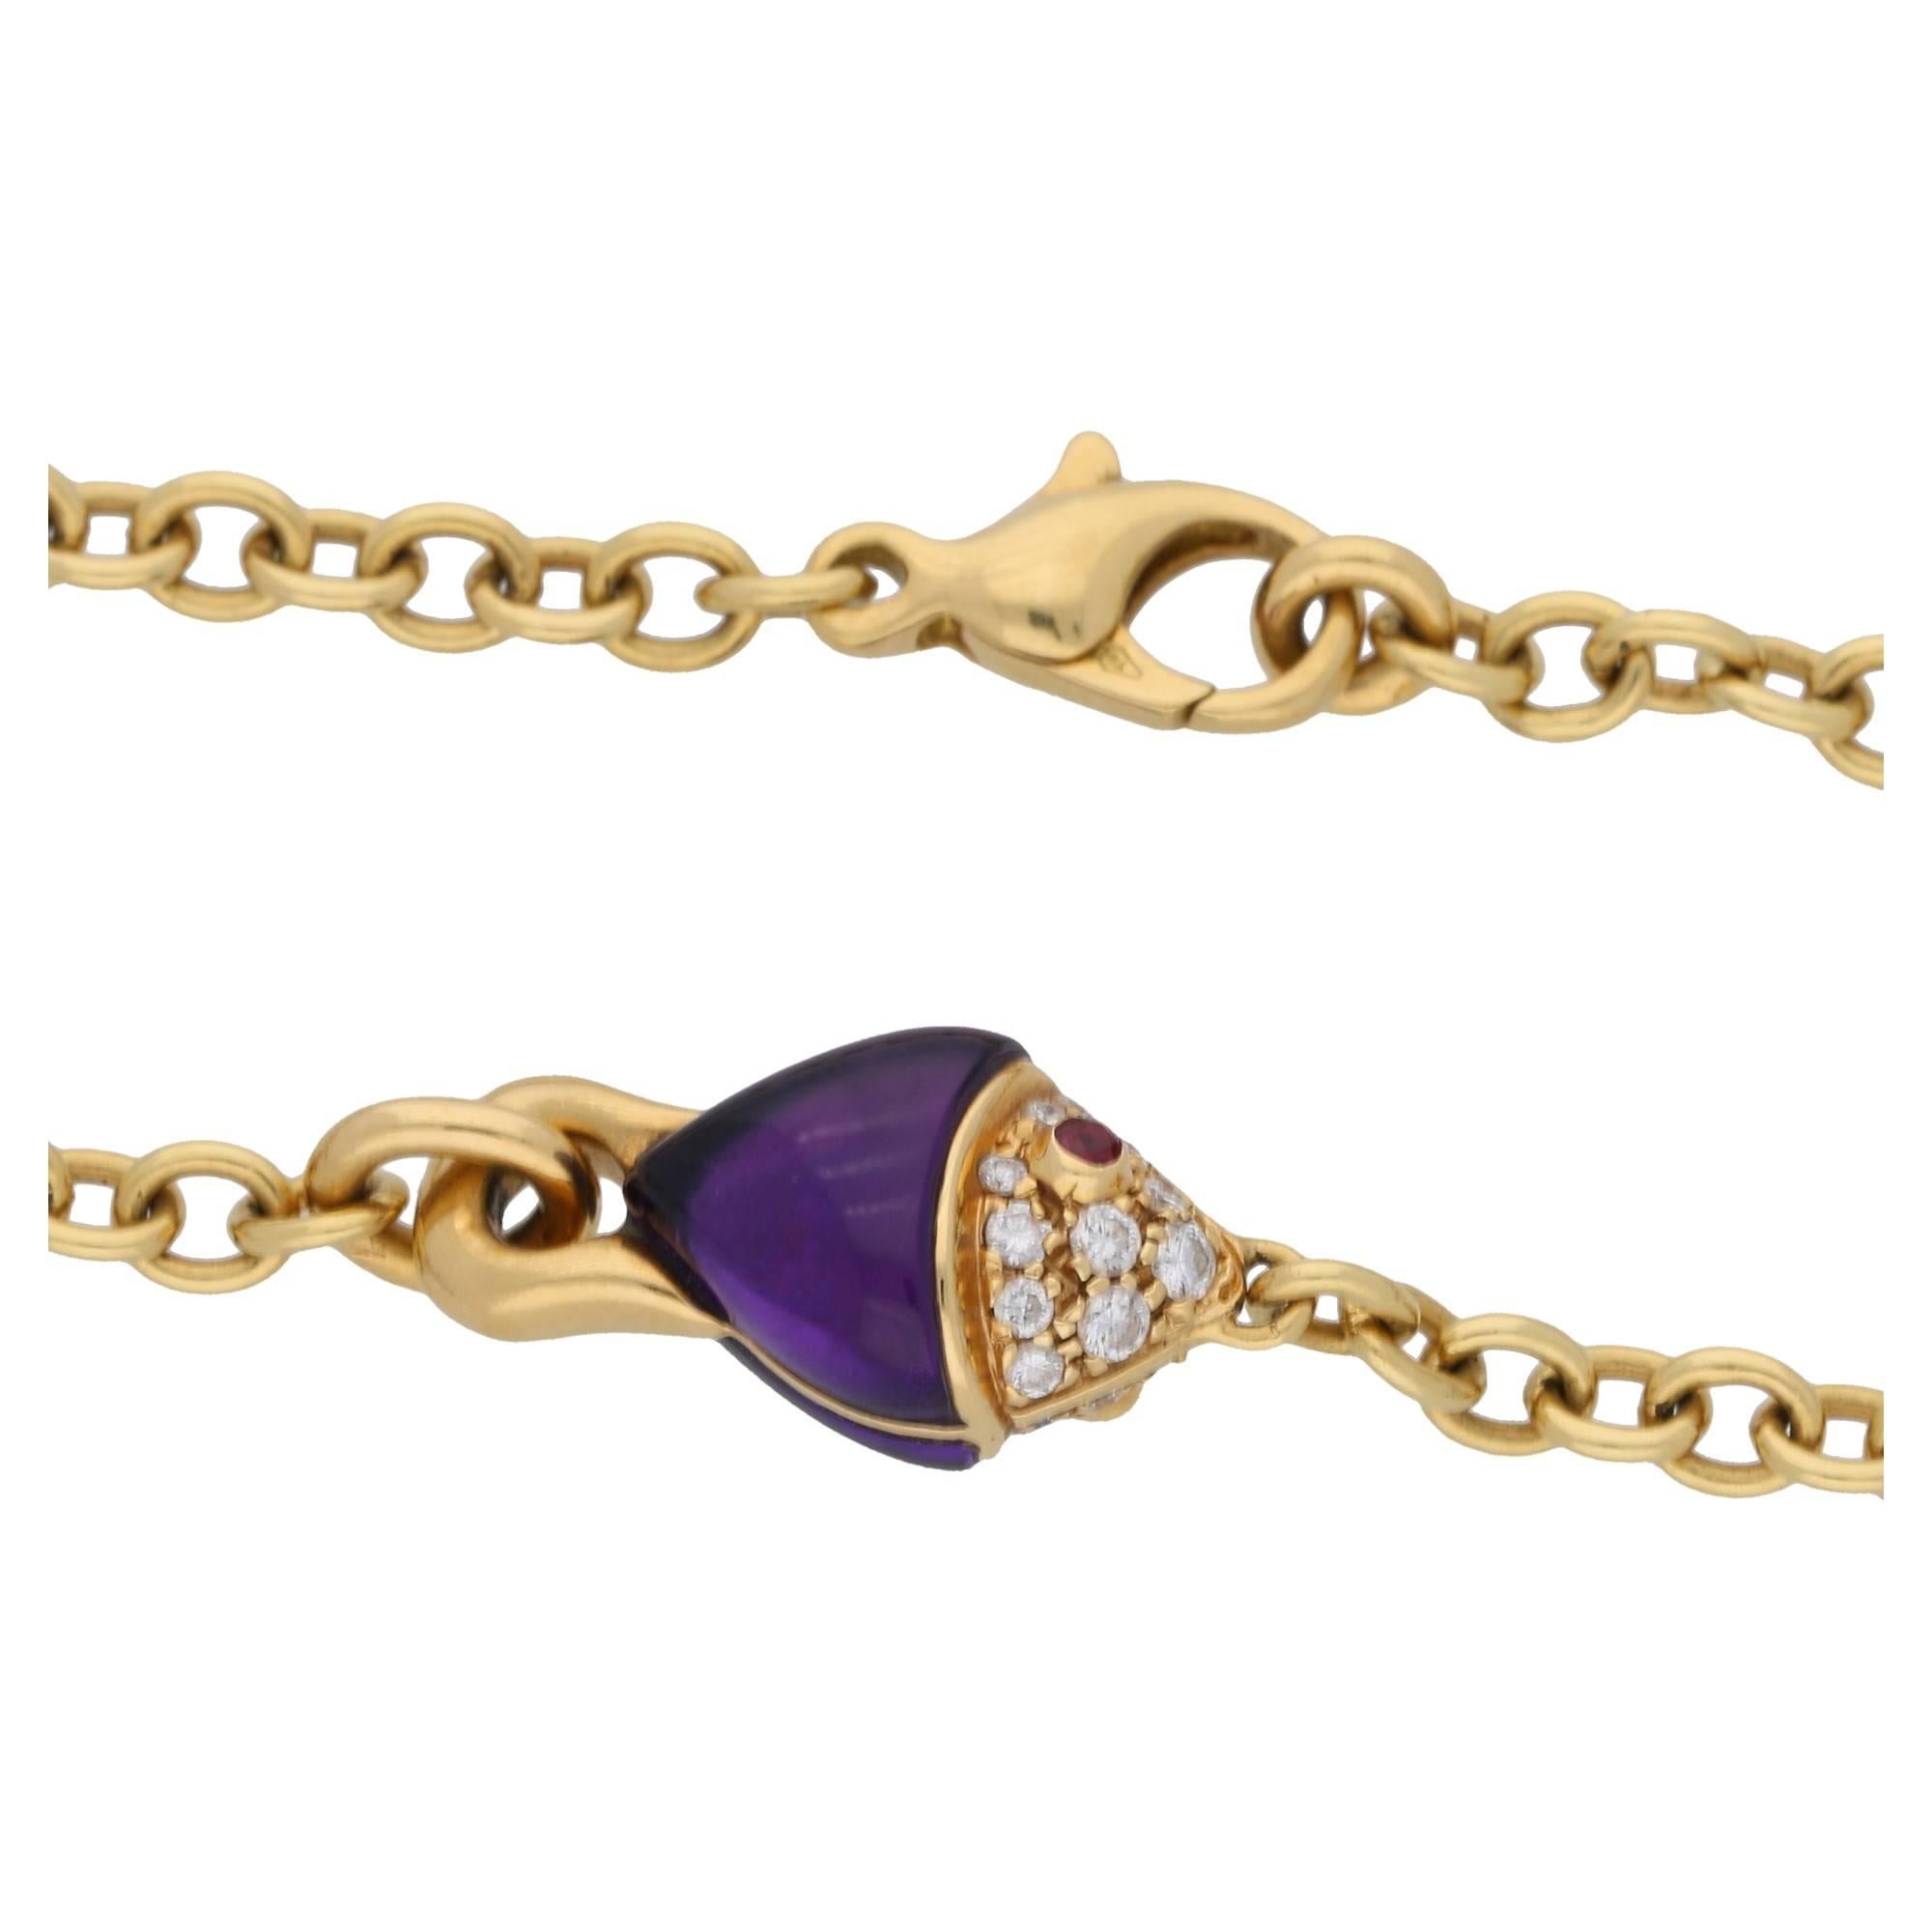 A fanciful Bvlgari amethyst, diamond and ruby fish necklace set in 18ct yellow gold. With two fantasy cabochon cut amethysts creating both sides of the fish's body embelished with a pave set round brilliant cut diamond face finished with collet set